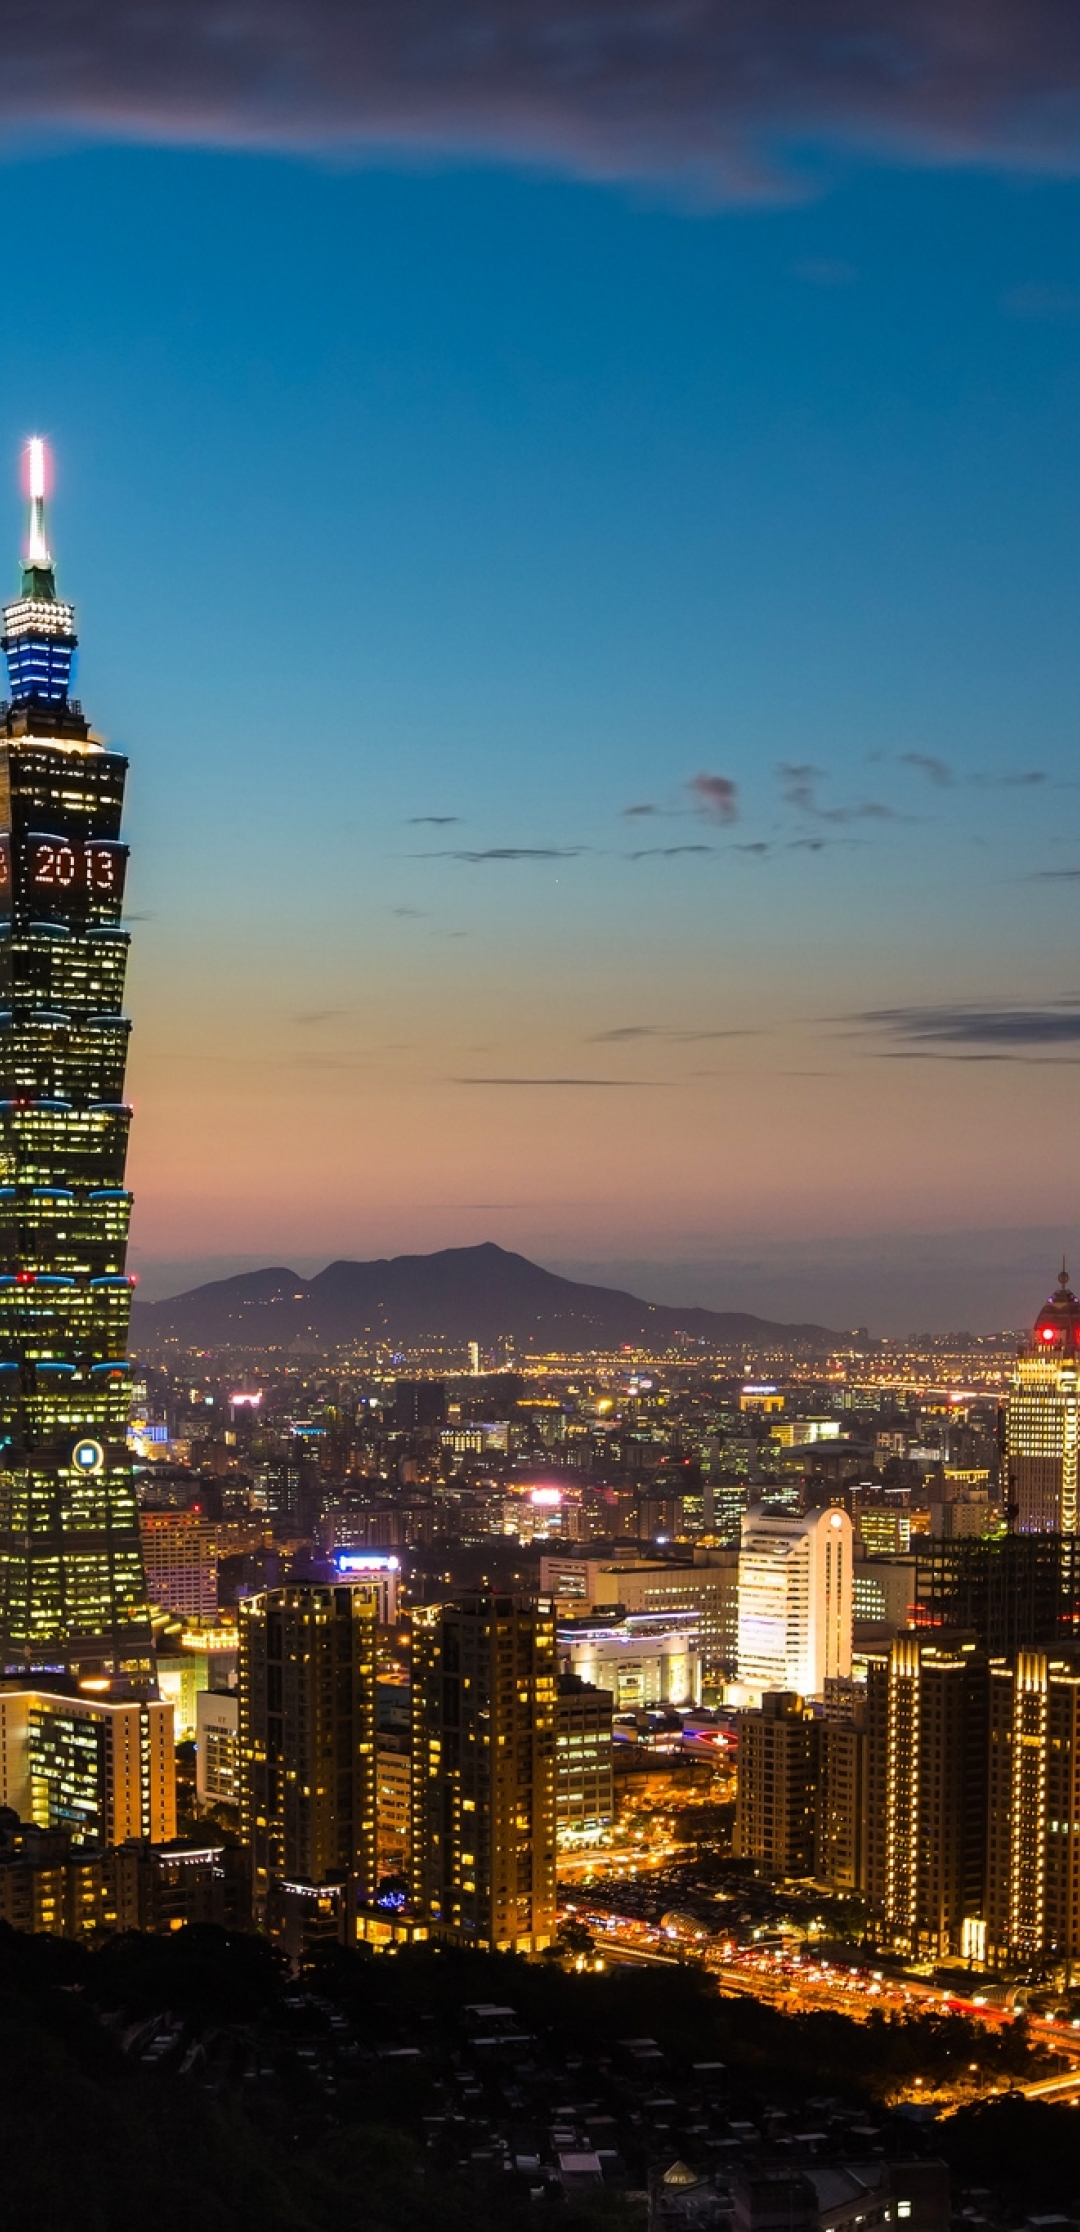 1080x2232 Taiwan Taipei Republic Of China 1080x2232 Resolution Wallpaper Hd City 4k Wallpapers Images Photos And Background Wallpapers Den